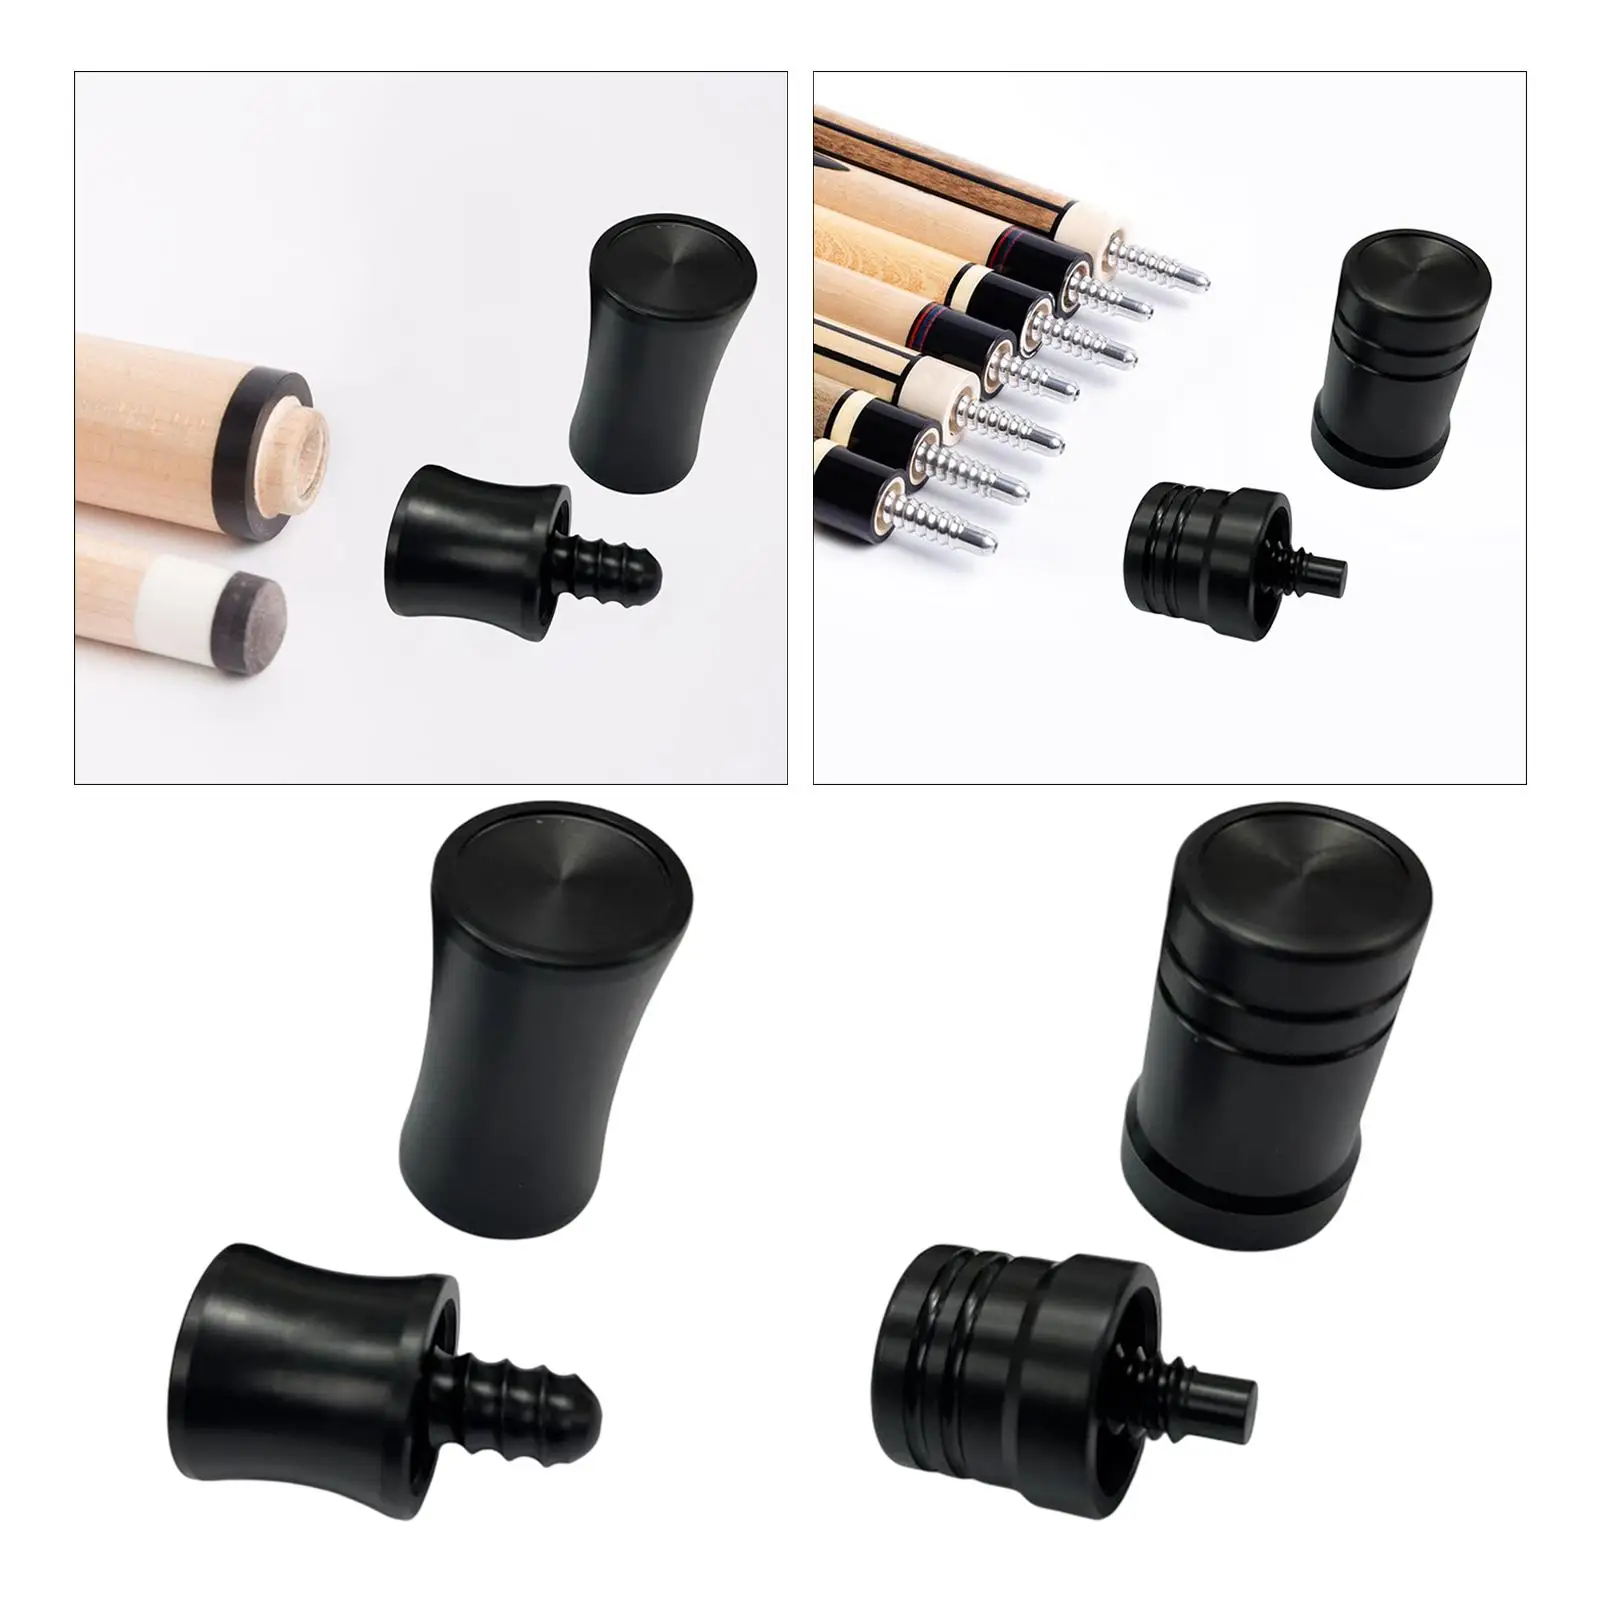 Joint Protector for Pool Cue Billiards Stick Sporting Protection Joint Caps Tip Tools for Protect Shaft and Head Equipment